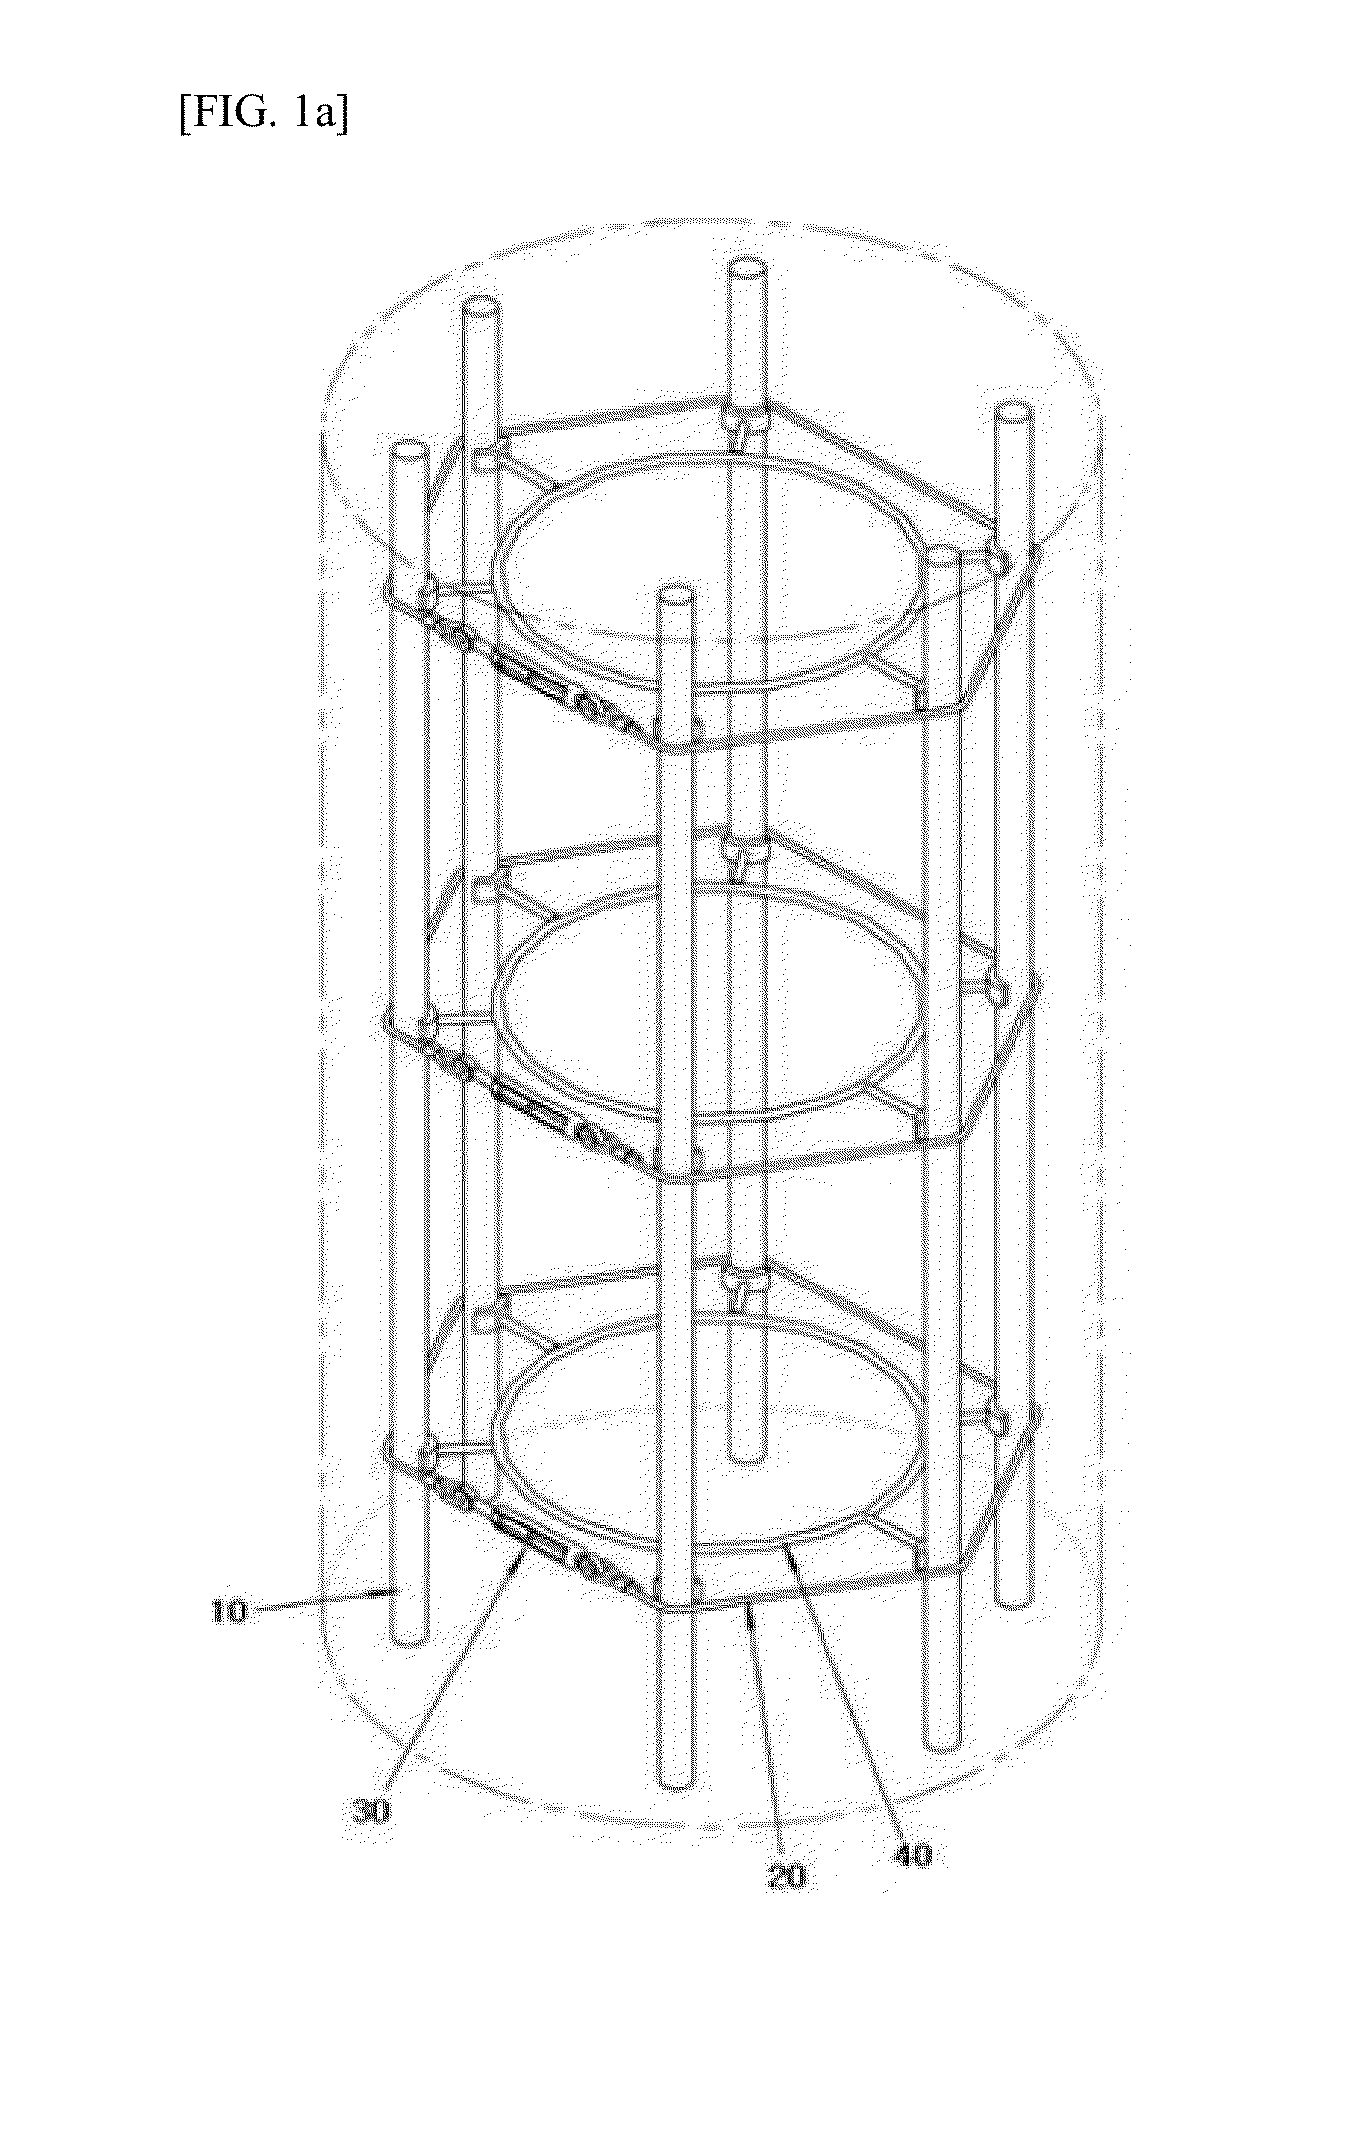 Fire-resistance enhancing method for the high strength concrete structure